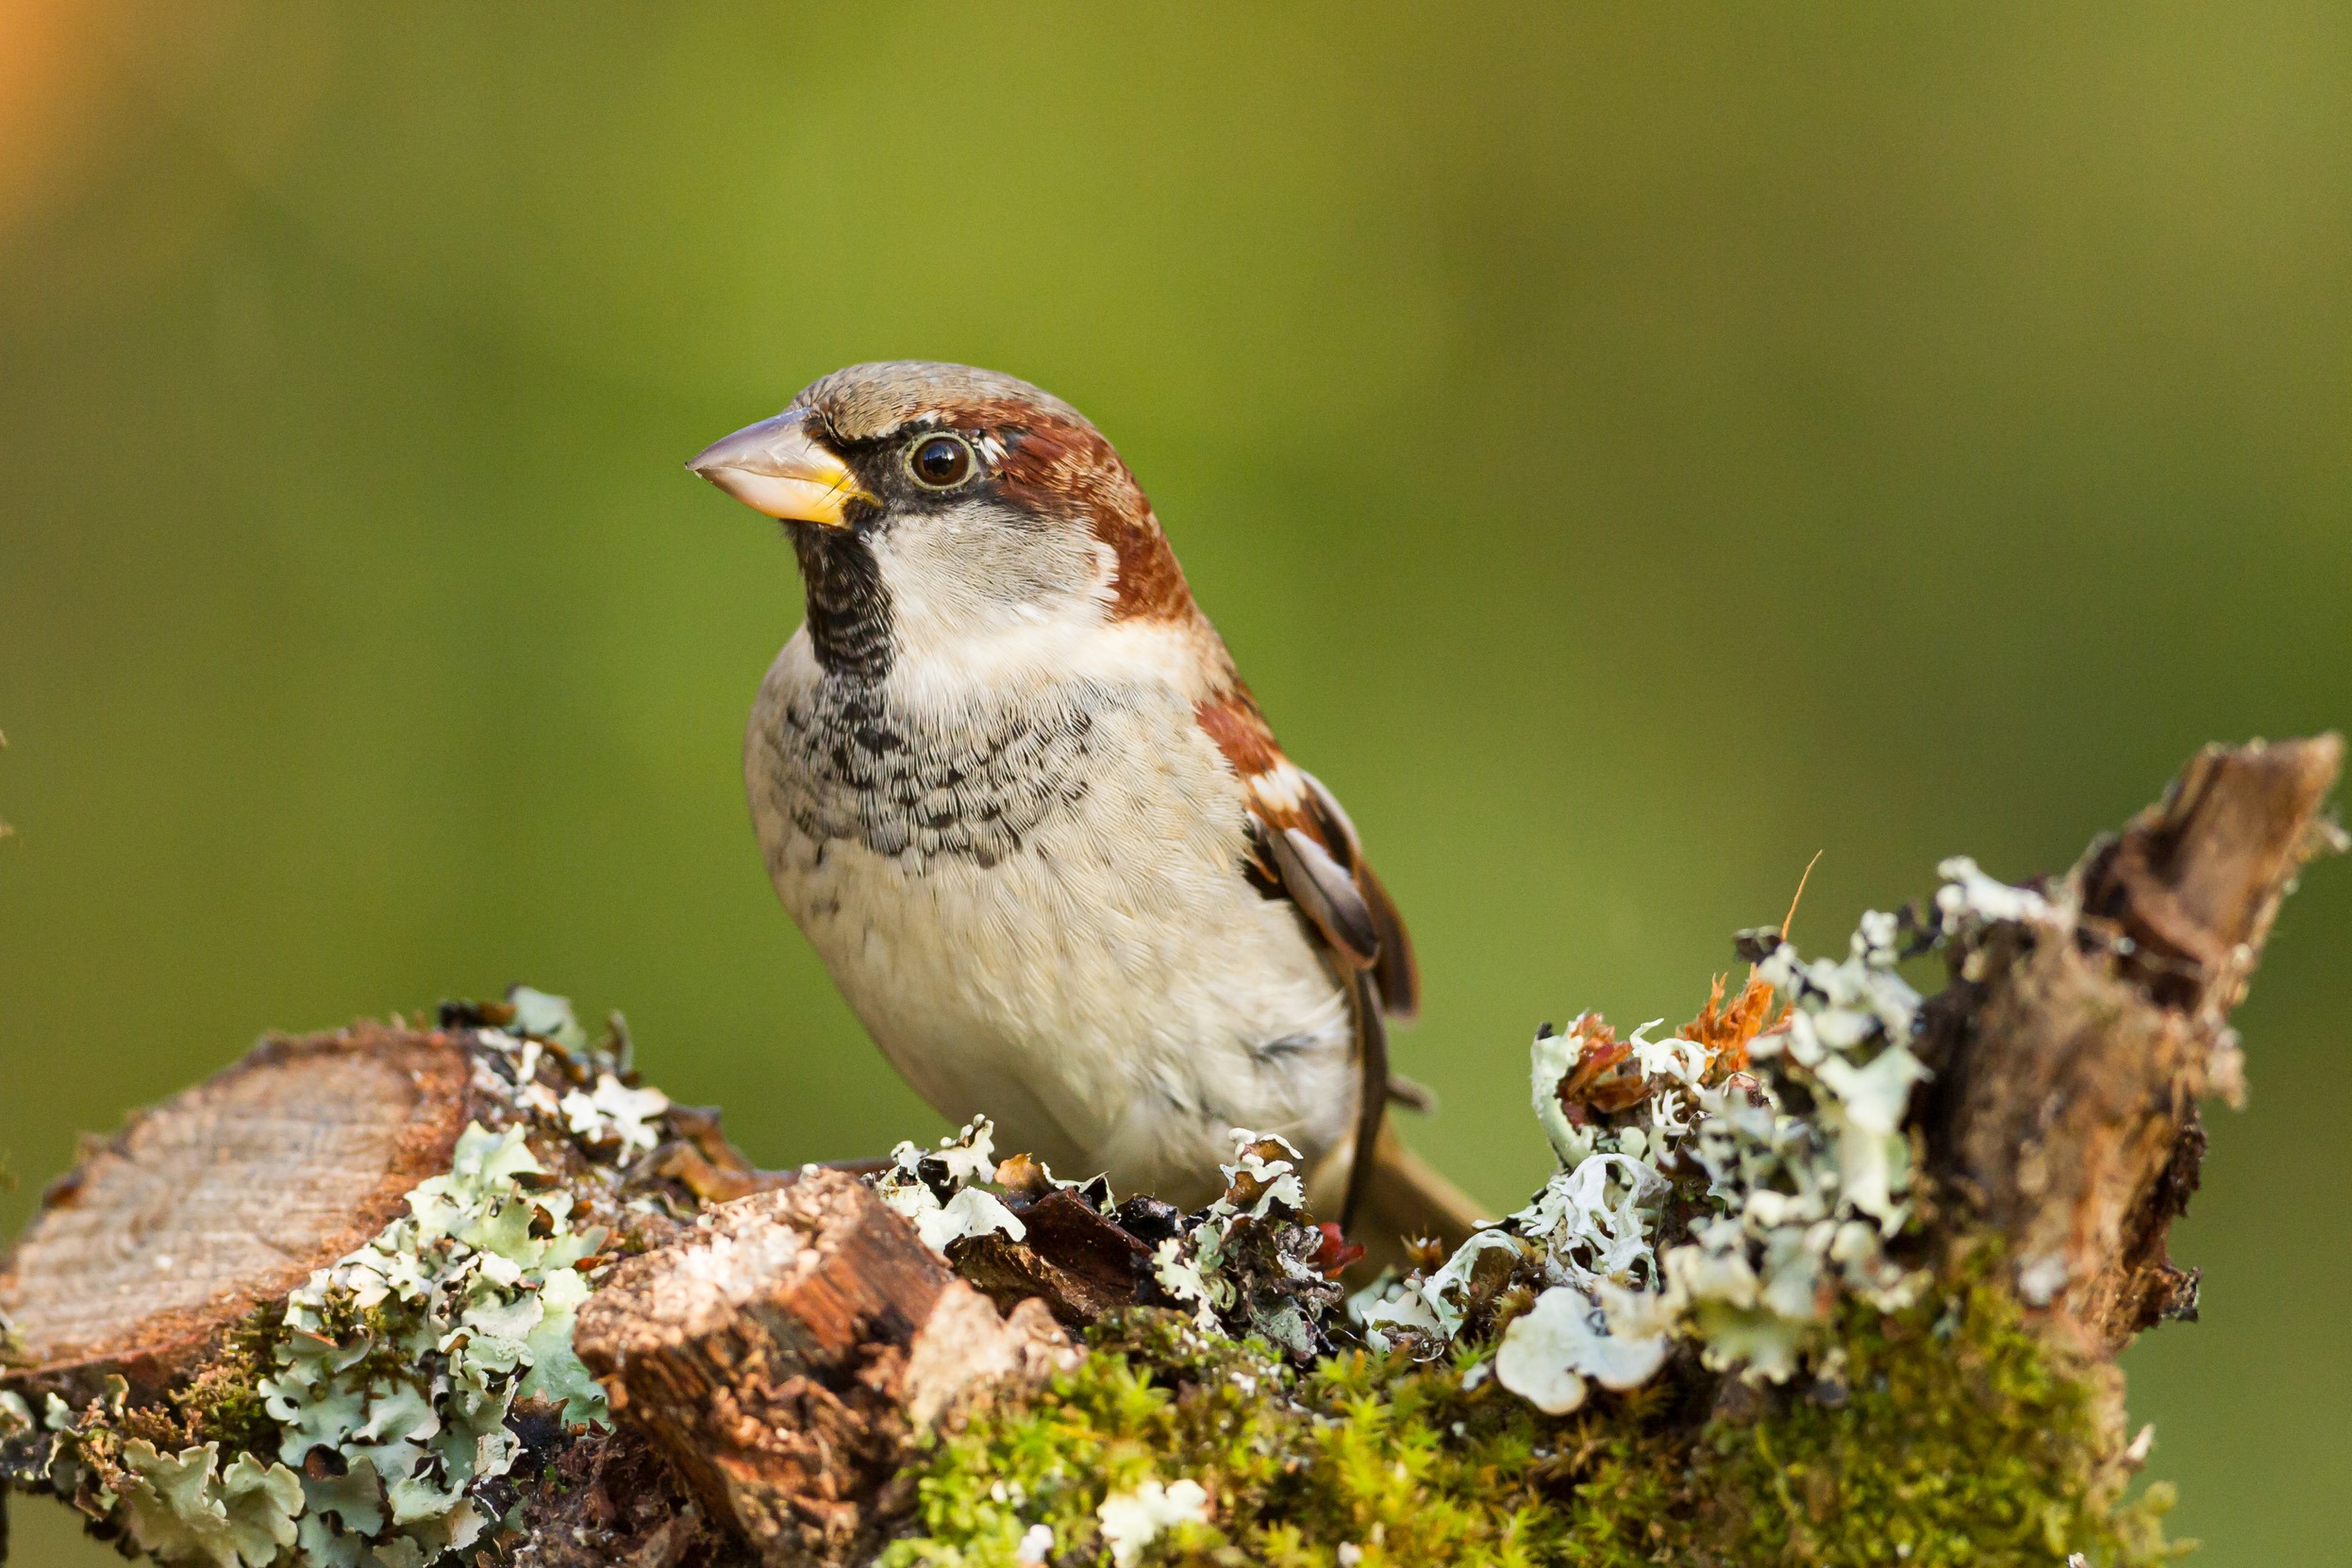 A lone House Sparrow perched on a lichen covered log.